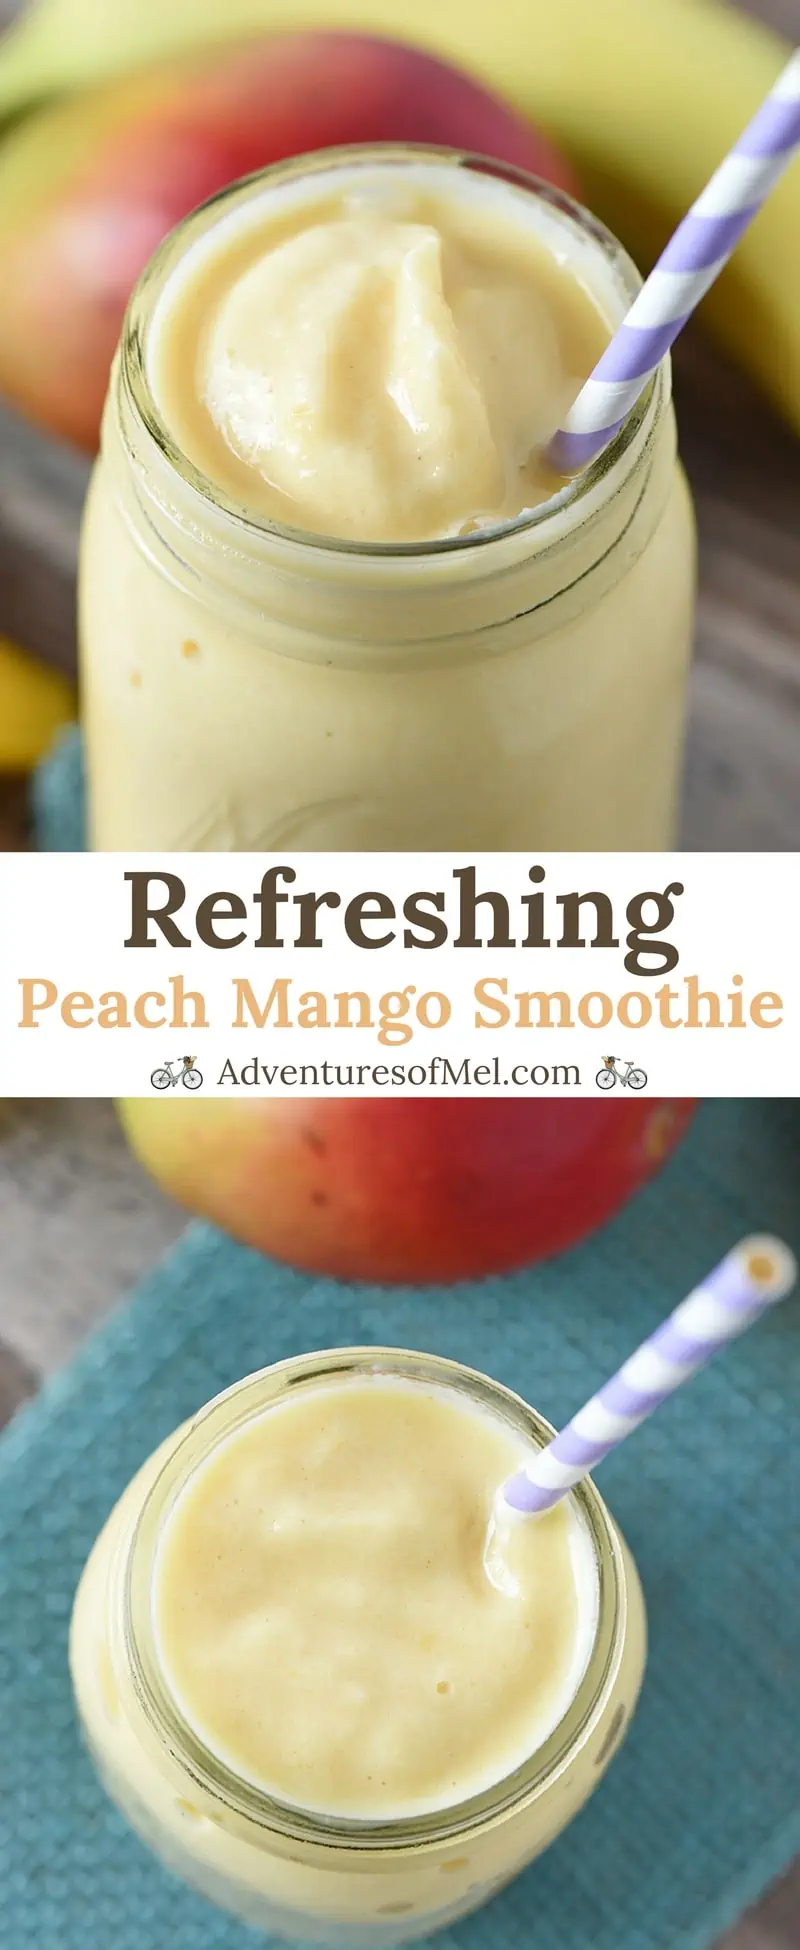 Peach Mango Smoothie recipe that's healthy, quick, and an easy to make snack. Made with 1 banana and a dash of honey, also a tasty addition to mornings.